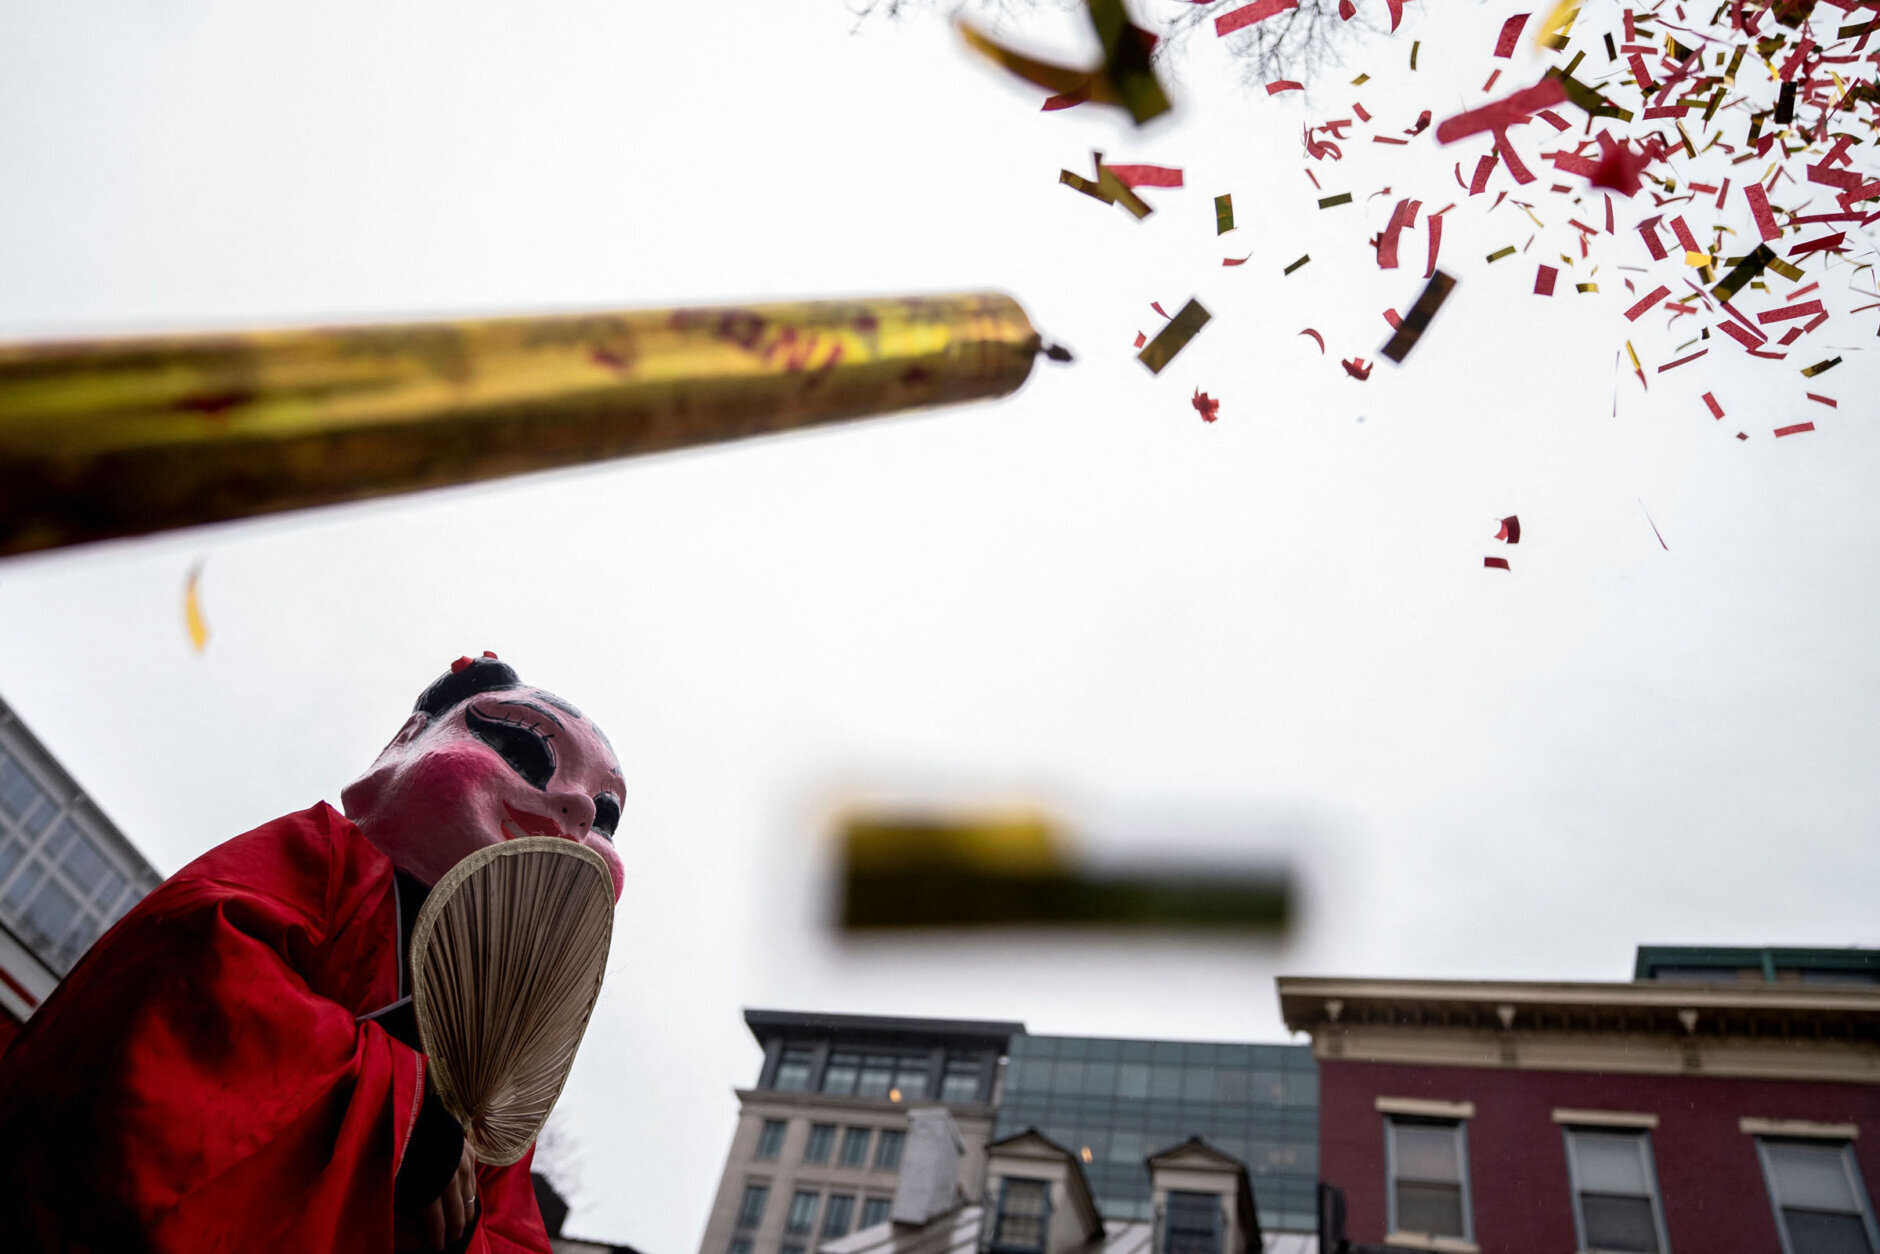 Confetti flies over a performer following the Lunar New Year Parade in the Chinatown neighborhood of Washington, DC, on January 22, 2023. - 2023 is the year of the rabbit in the Chinese horoscope. (Photo by Stefani Reynolds / AFP) (Photo by STEFANI REYNOLDS/AFP via Getty Images)